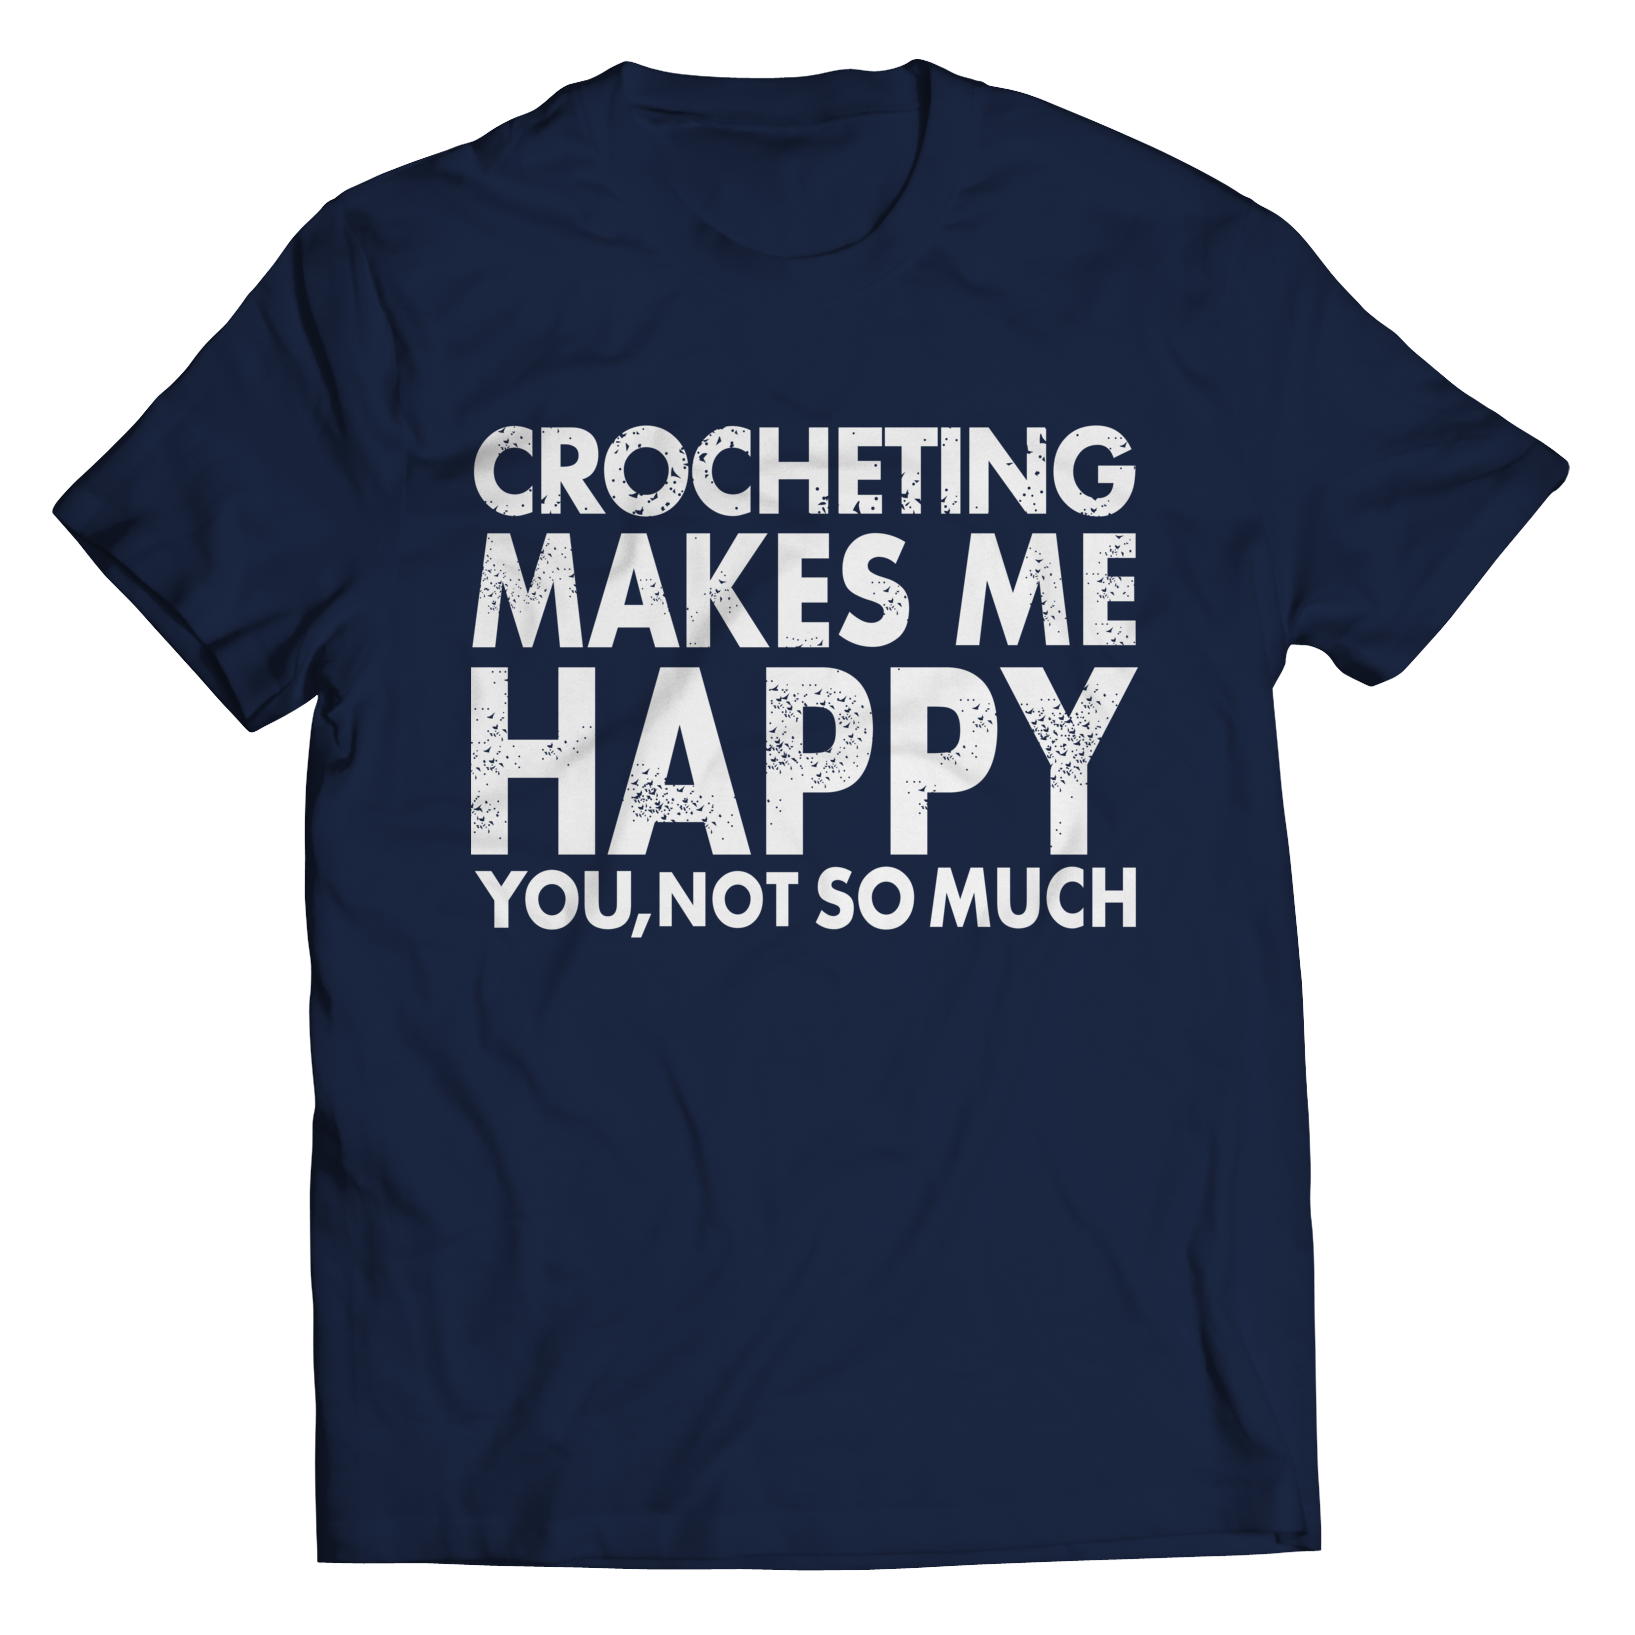 Limited Edition - Crocheting Makes Me Happy You, Not So Much Shirt